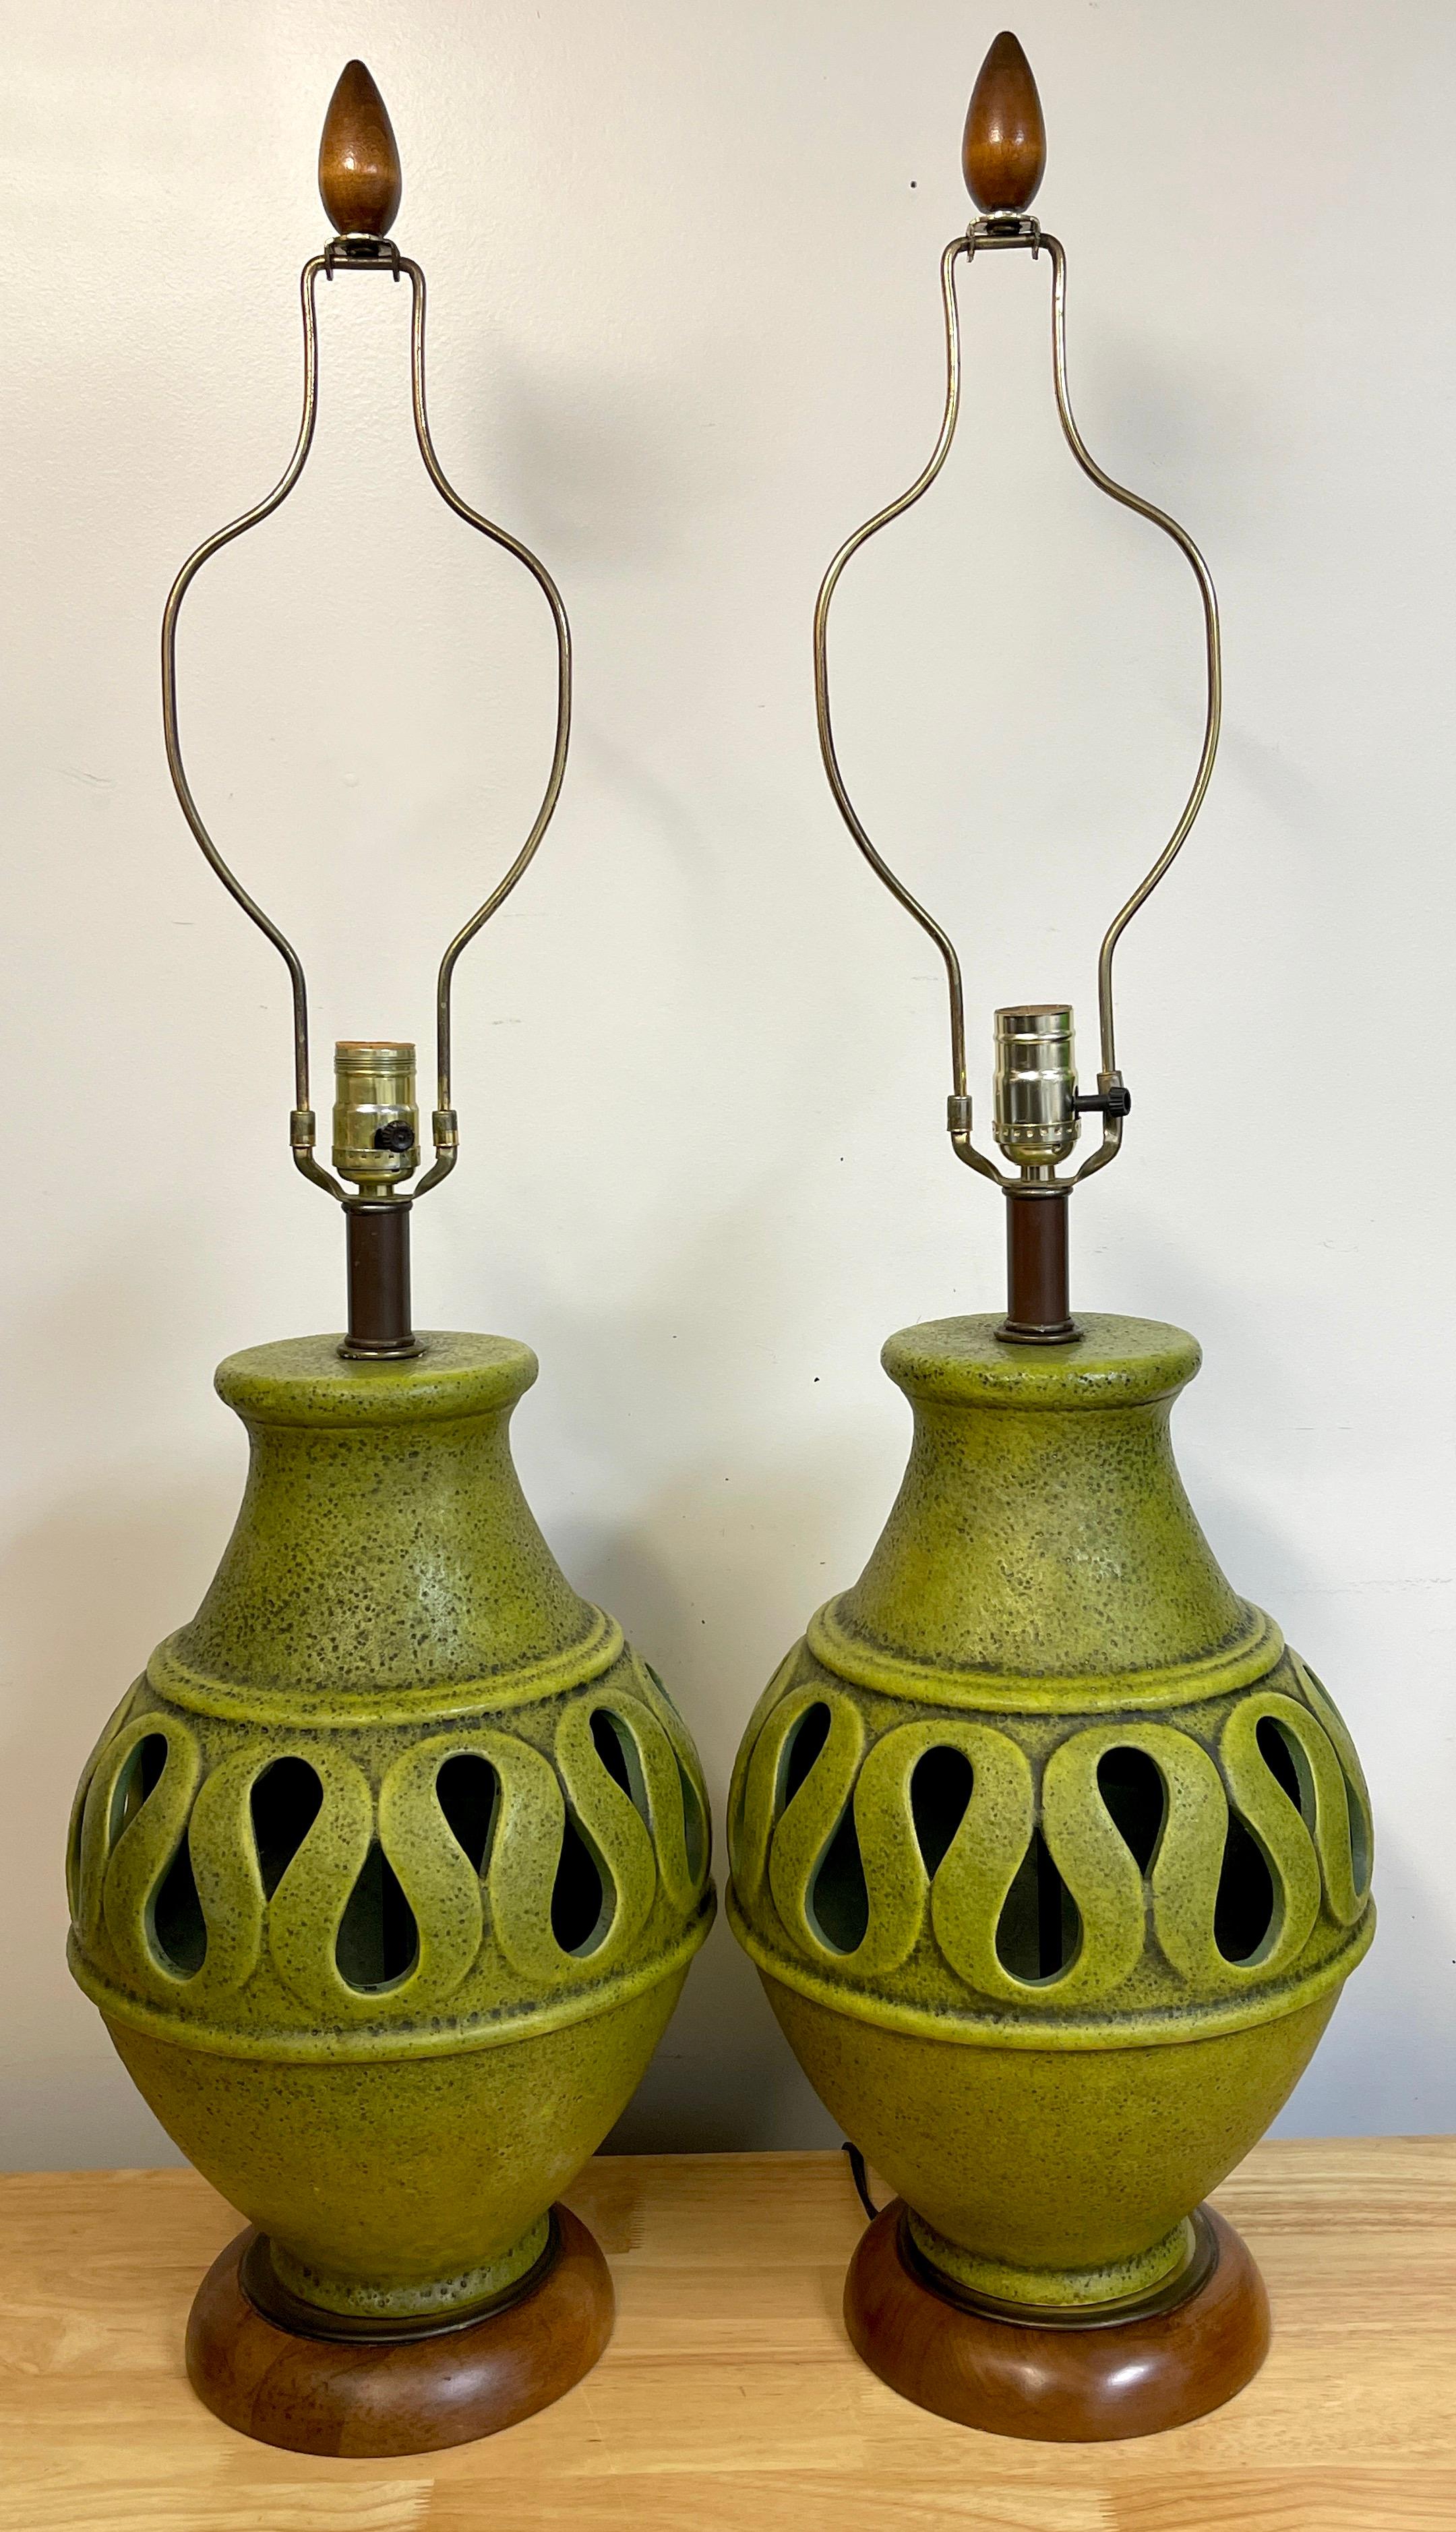 Pair of large Danish modern Green Monochrome Pottery Reticulated lamps
Each one with the original harp, teak wood finials and mounts. The beautiful monochrome green glaze vase with continuous undulating pierced center. Unmarked 
37